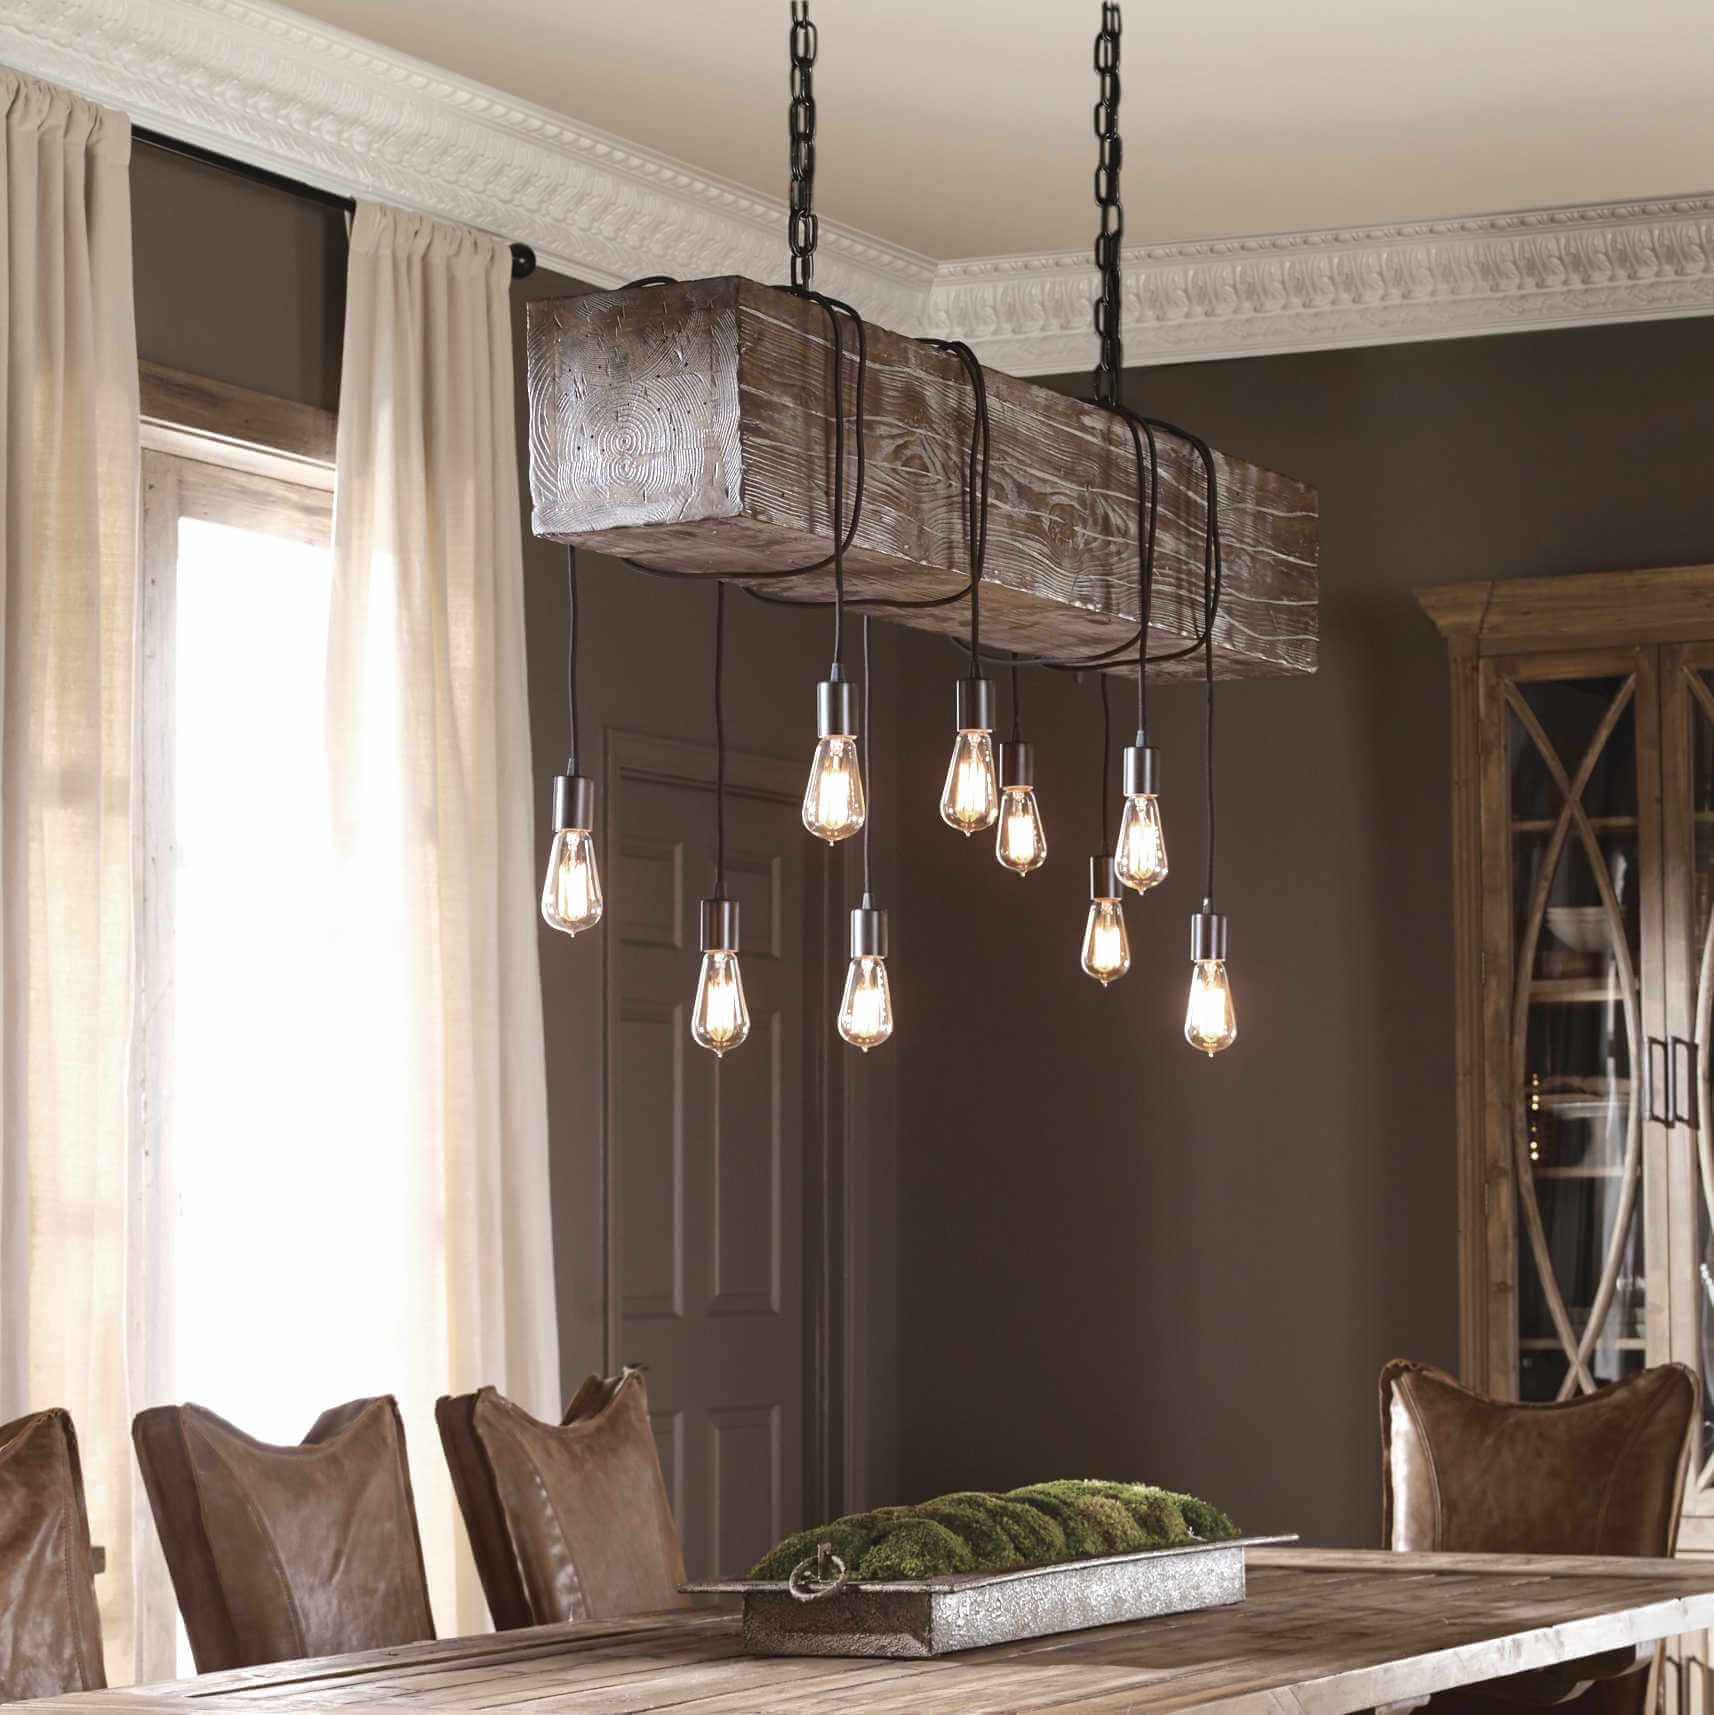 Wholesale Uttermost Accent Furniture, Mirrors, Wall Decor Throughout Whitten 4 Light Crystal Chandeliers (View 27 of 30)